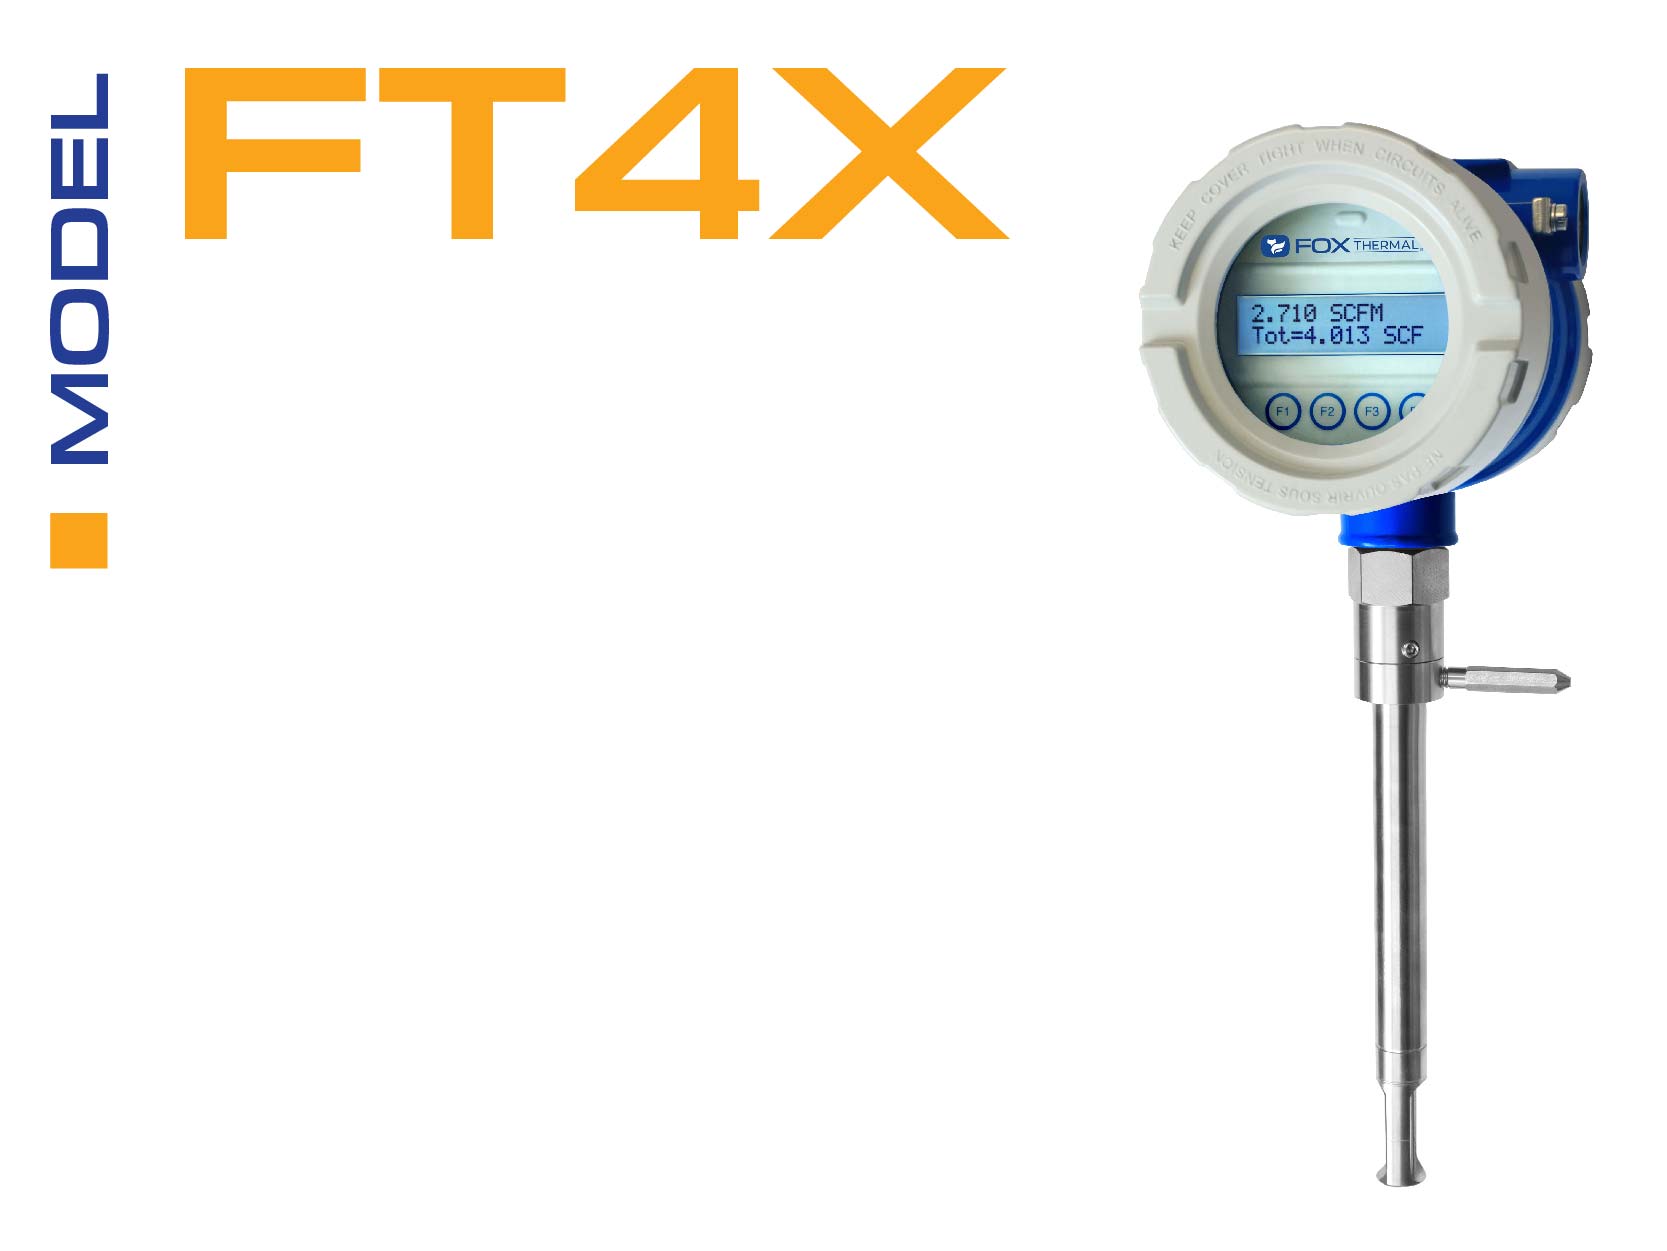 fox thermal product ft4X meter